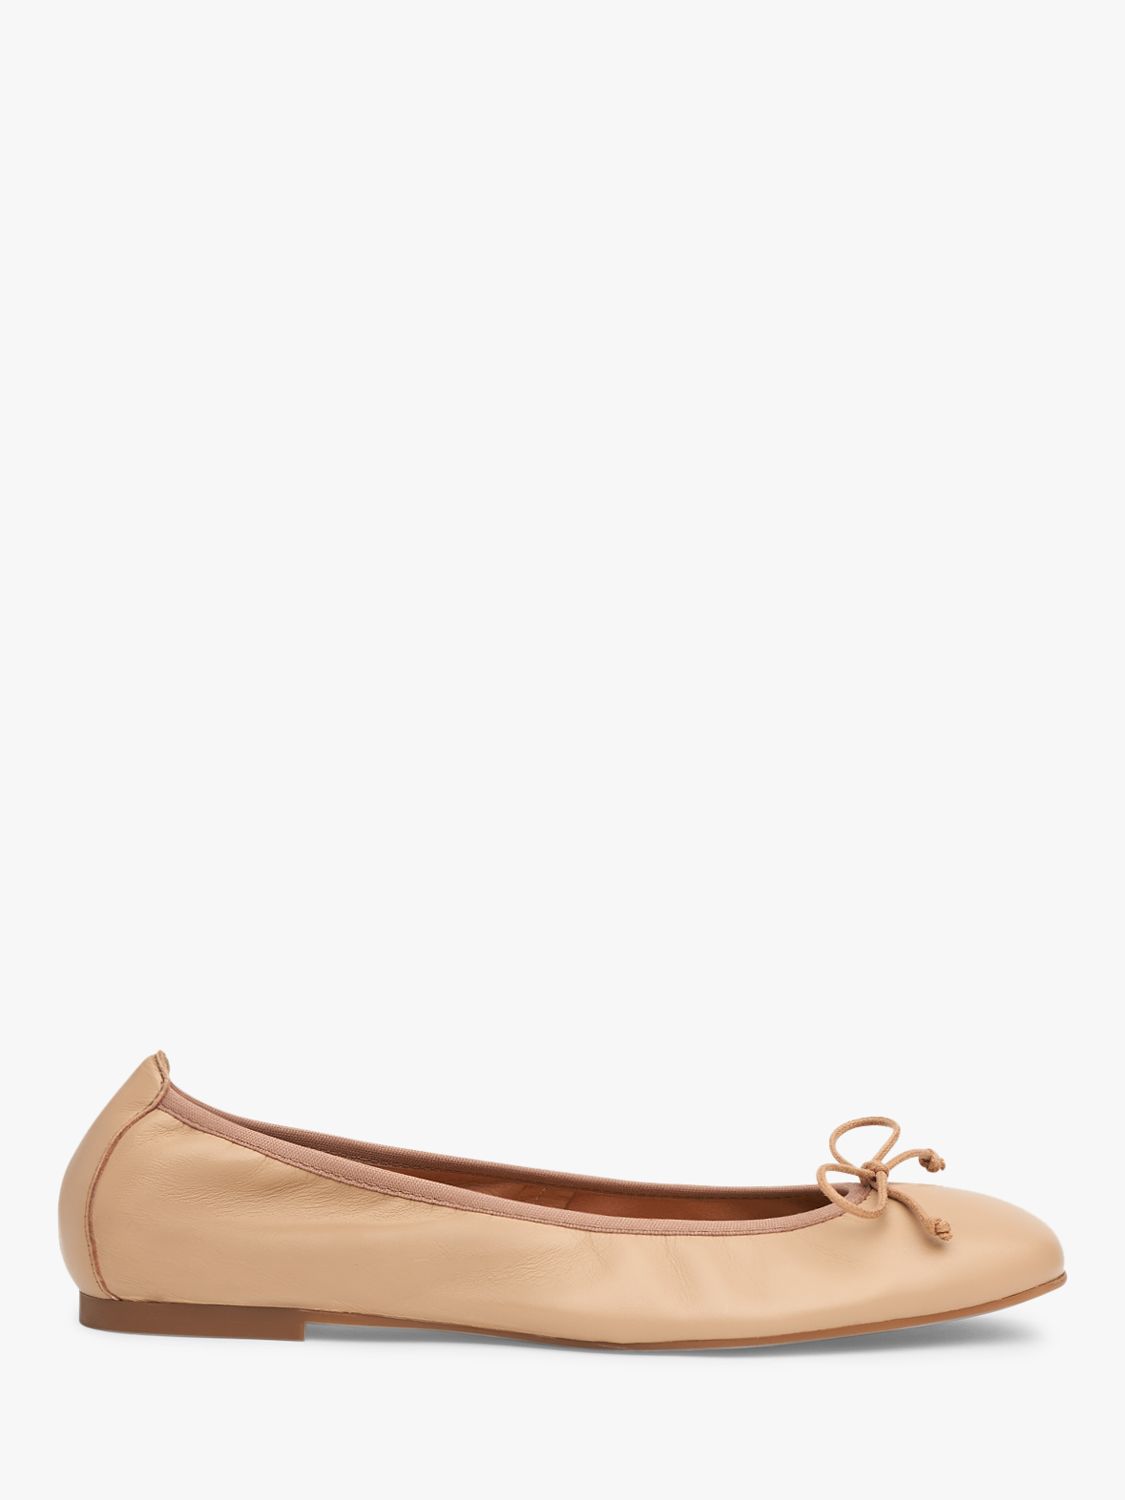 L.K.Bennett Trilly Flat Pumps, Natural Leather at John Lewis & Partners